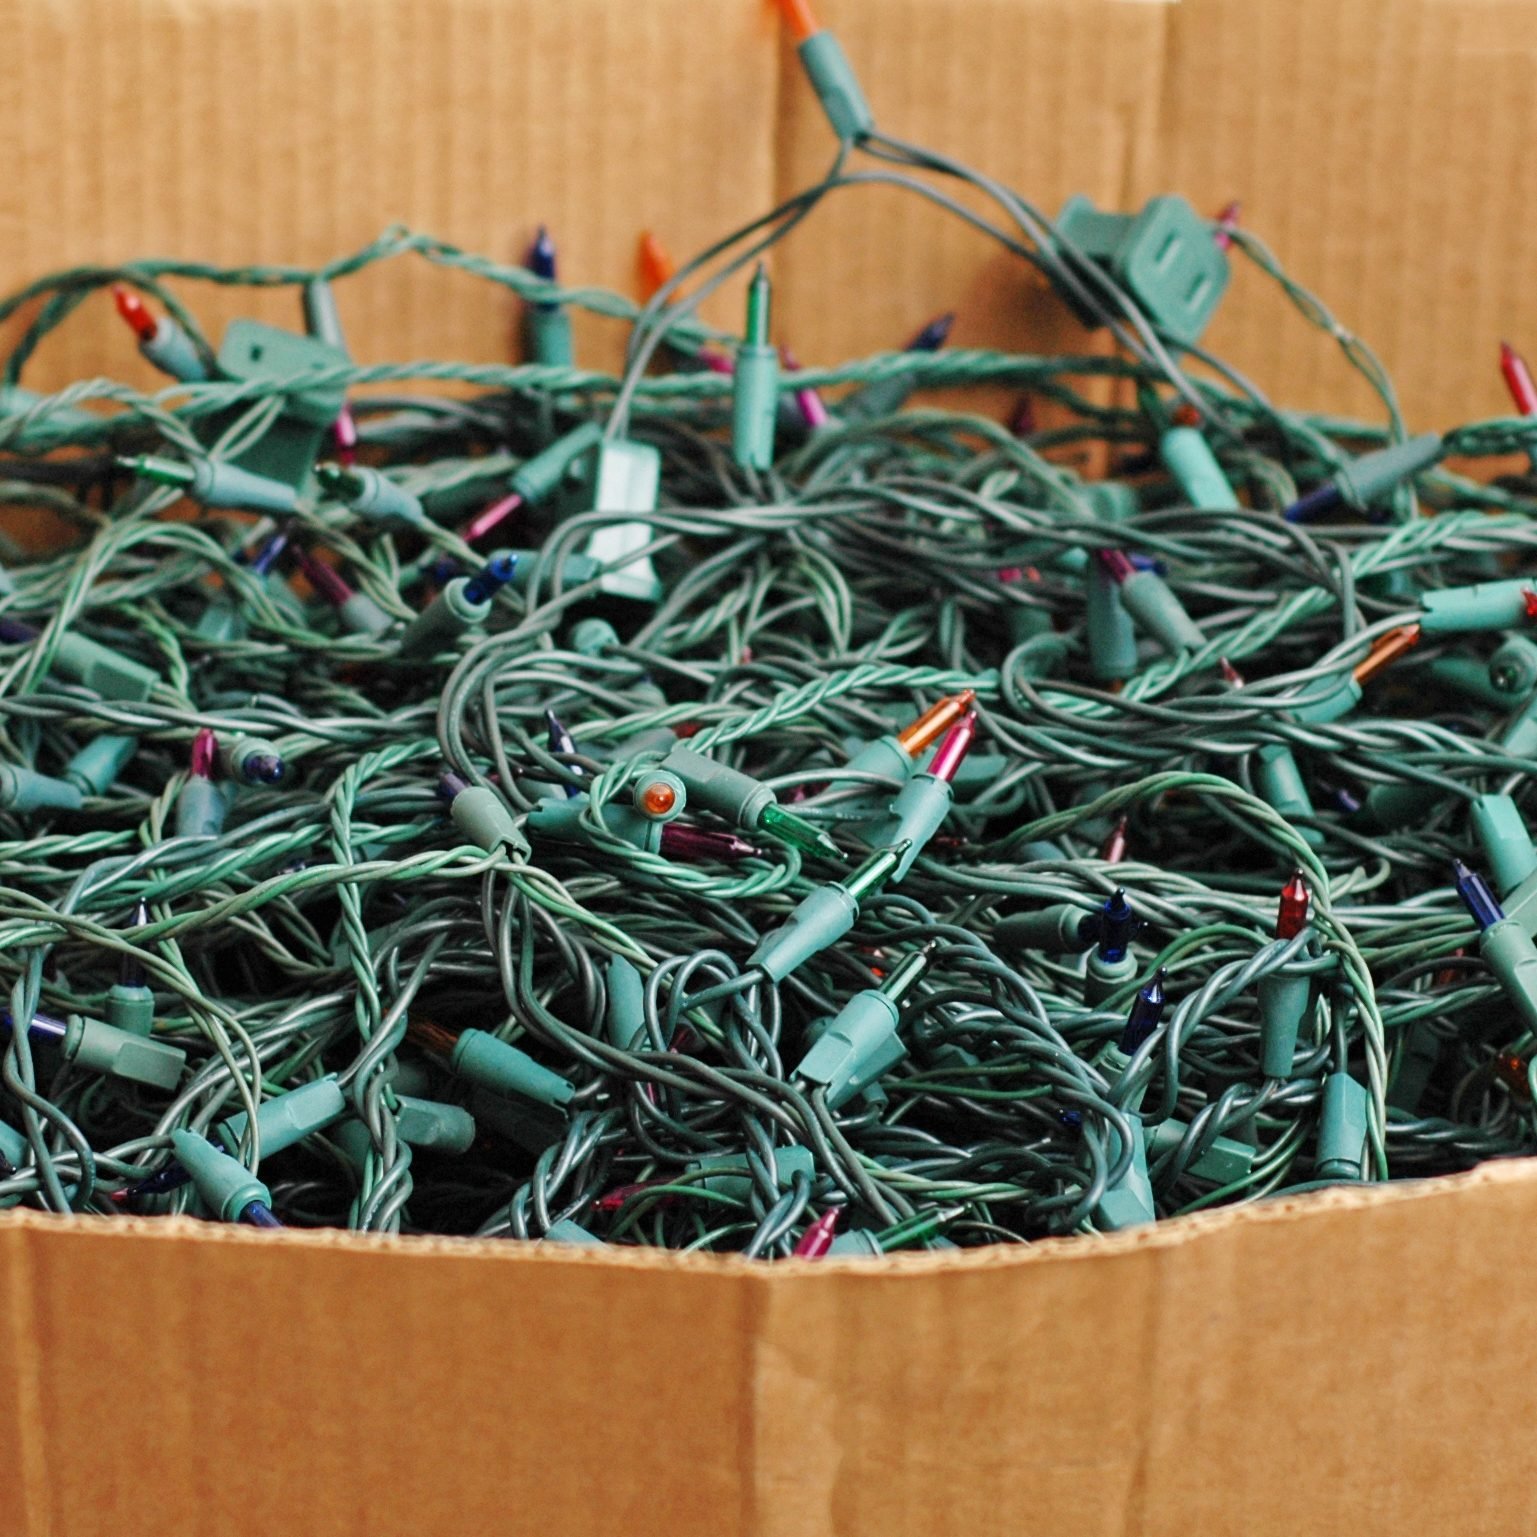 storing christmas lights in a box